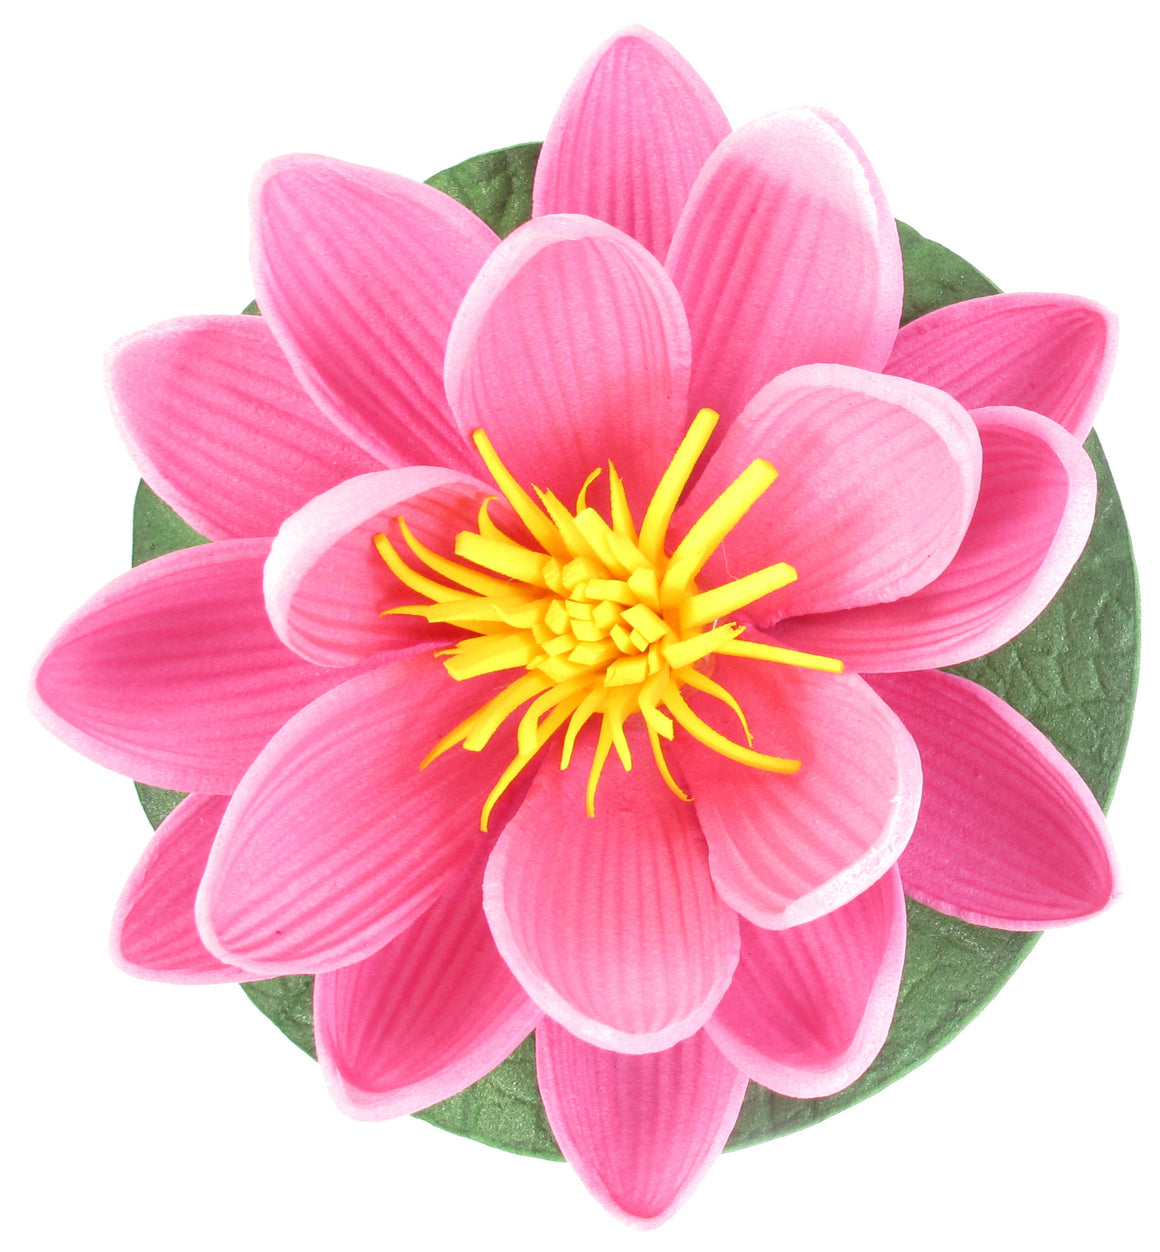 Small Floating Foam Water Lily Flower, For Small Water Feature, Approx. 3.25" x 3.25" x 2", Dark Pink - TropicaZona